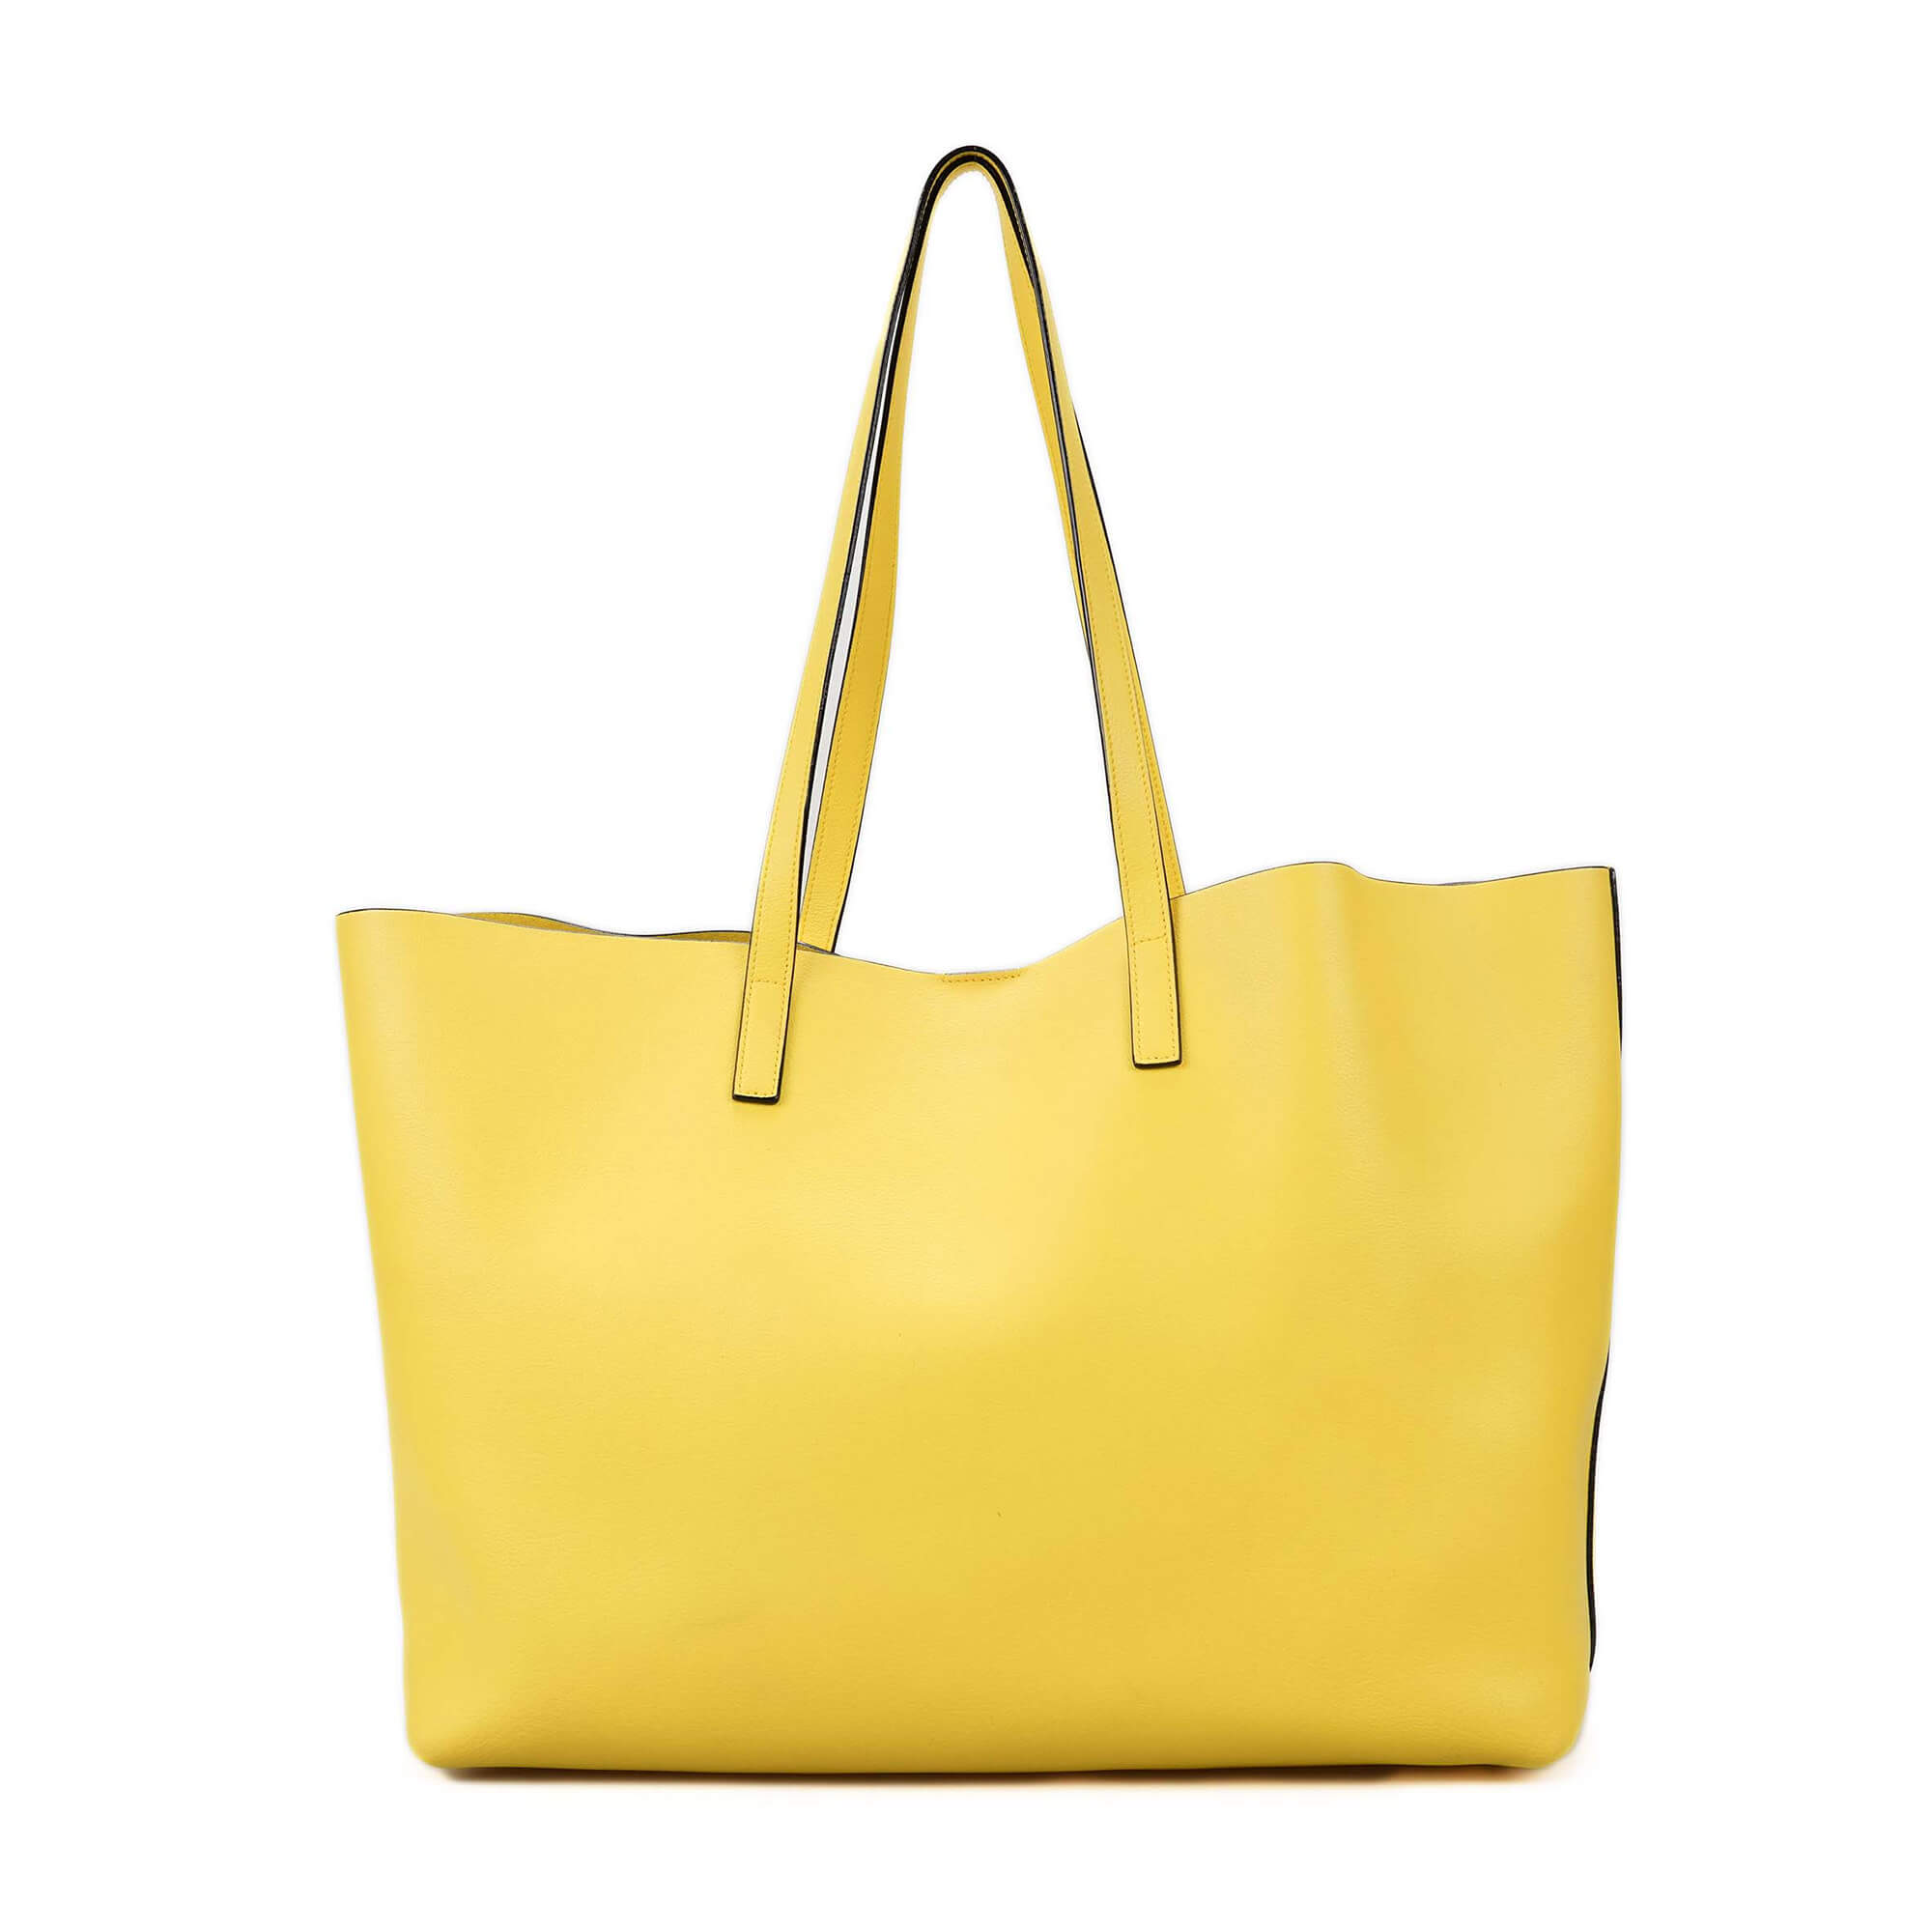 Yves Saint Laurent - Yellow Leather East West Tote Bag